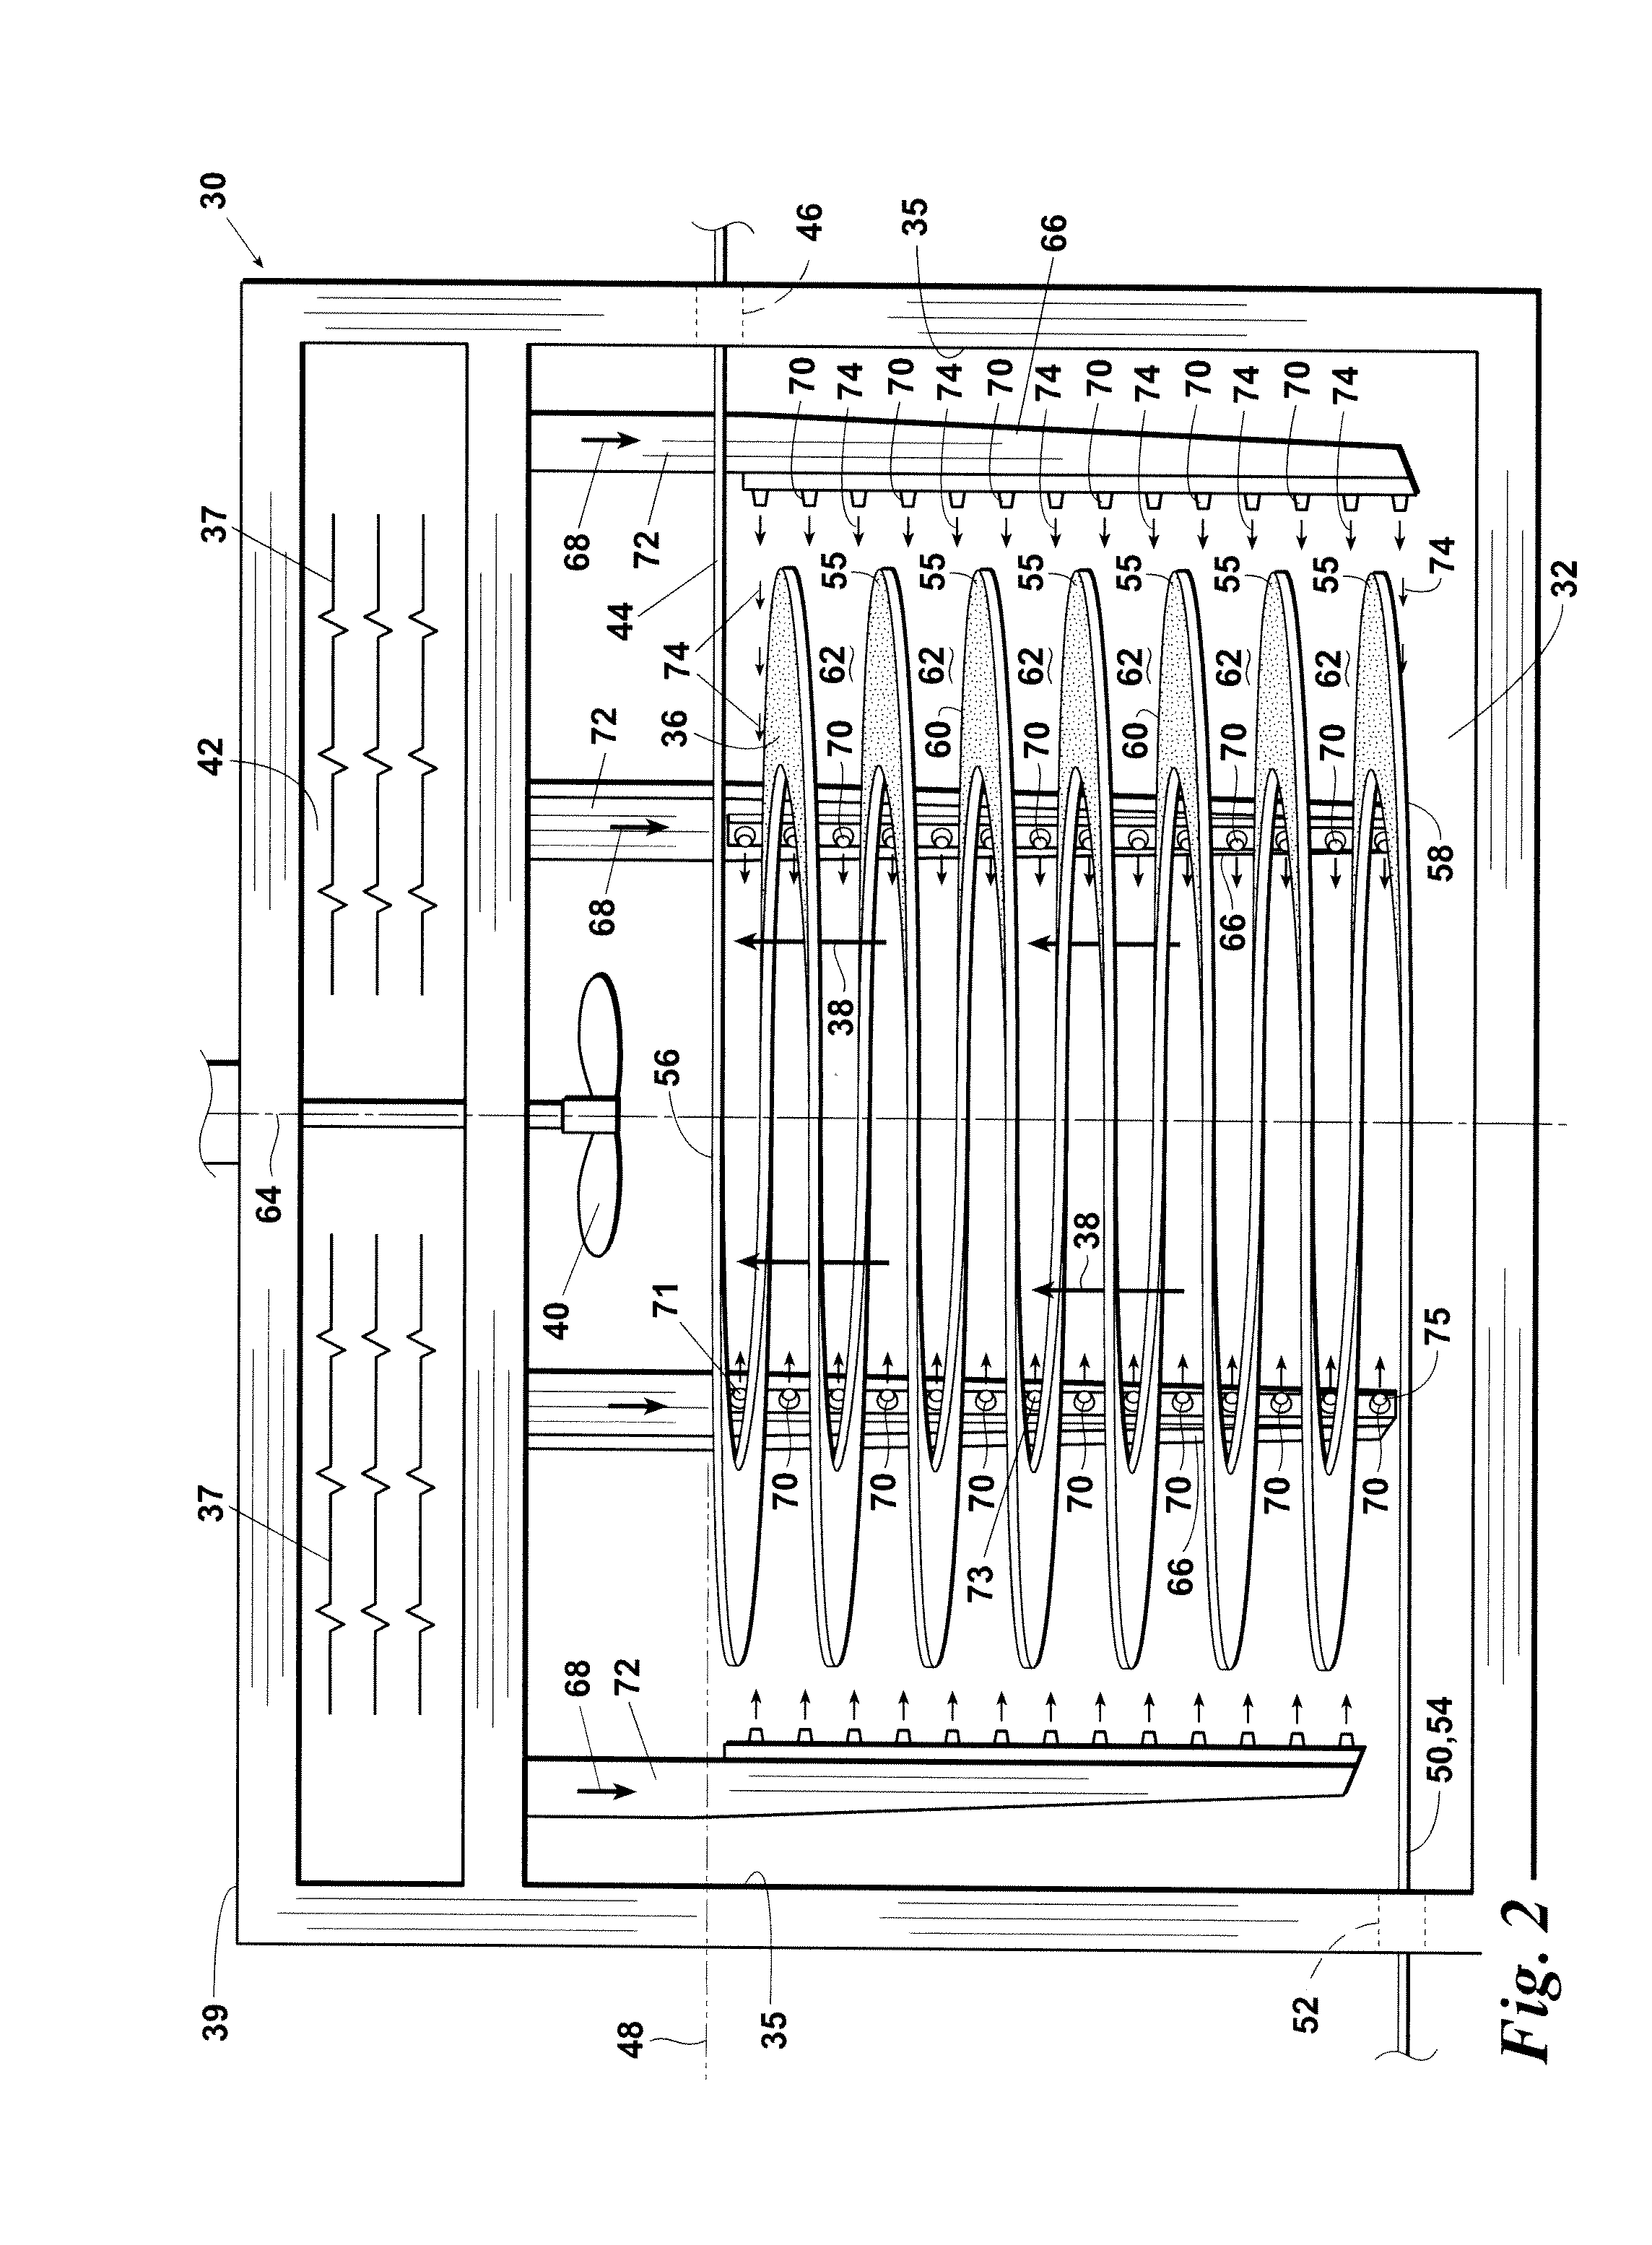 Spiral oven apparatus and method of cooking